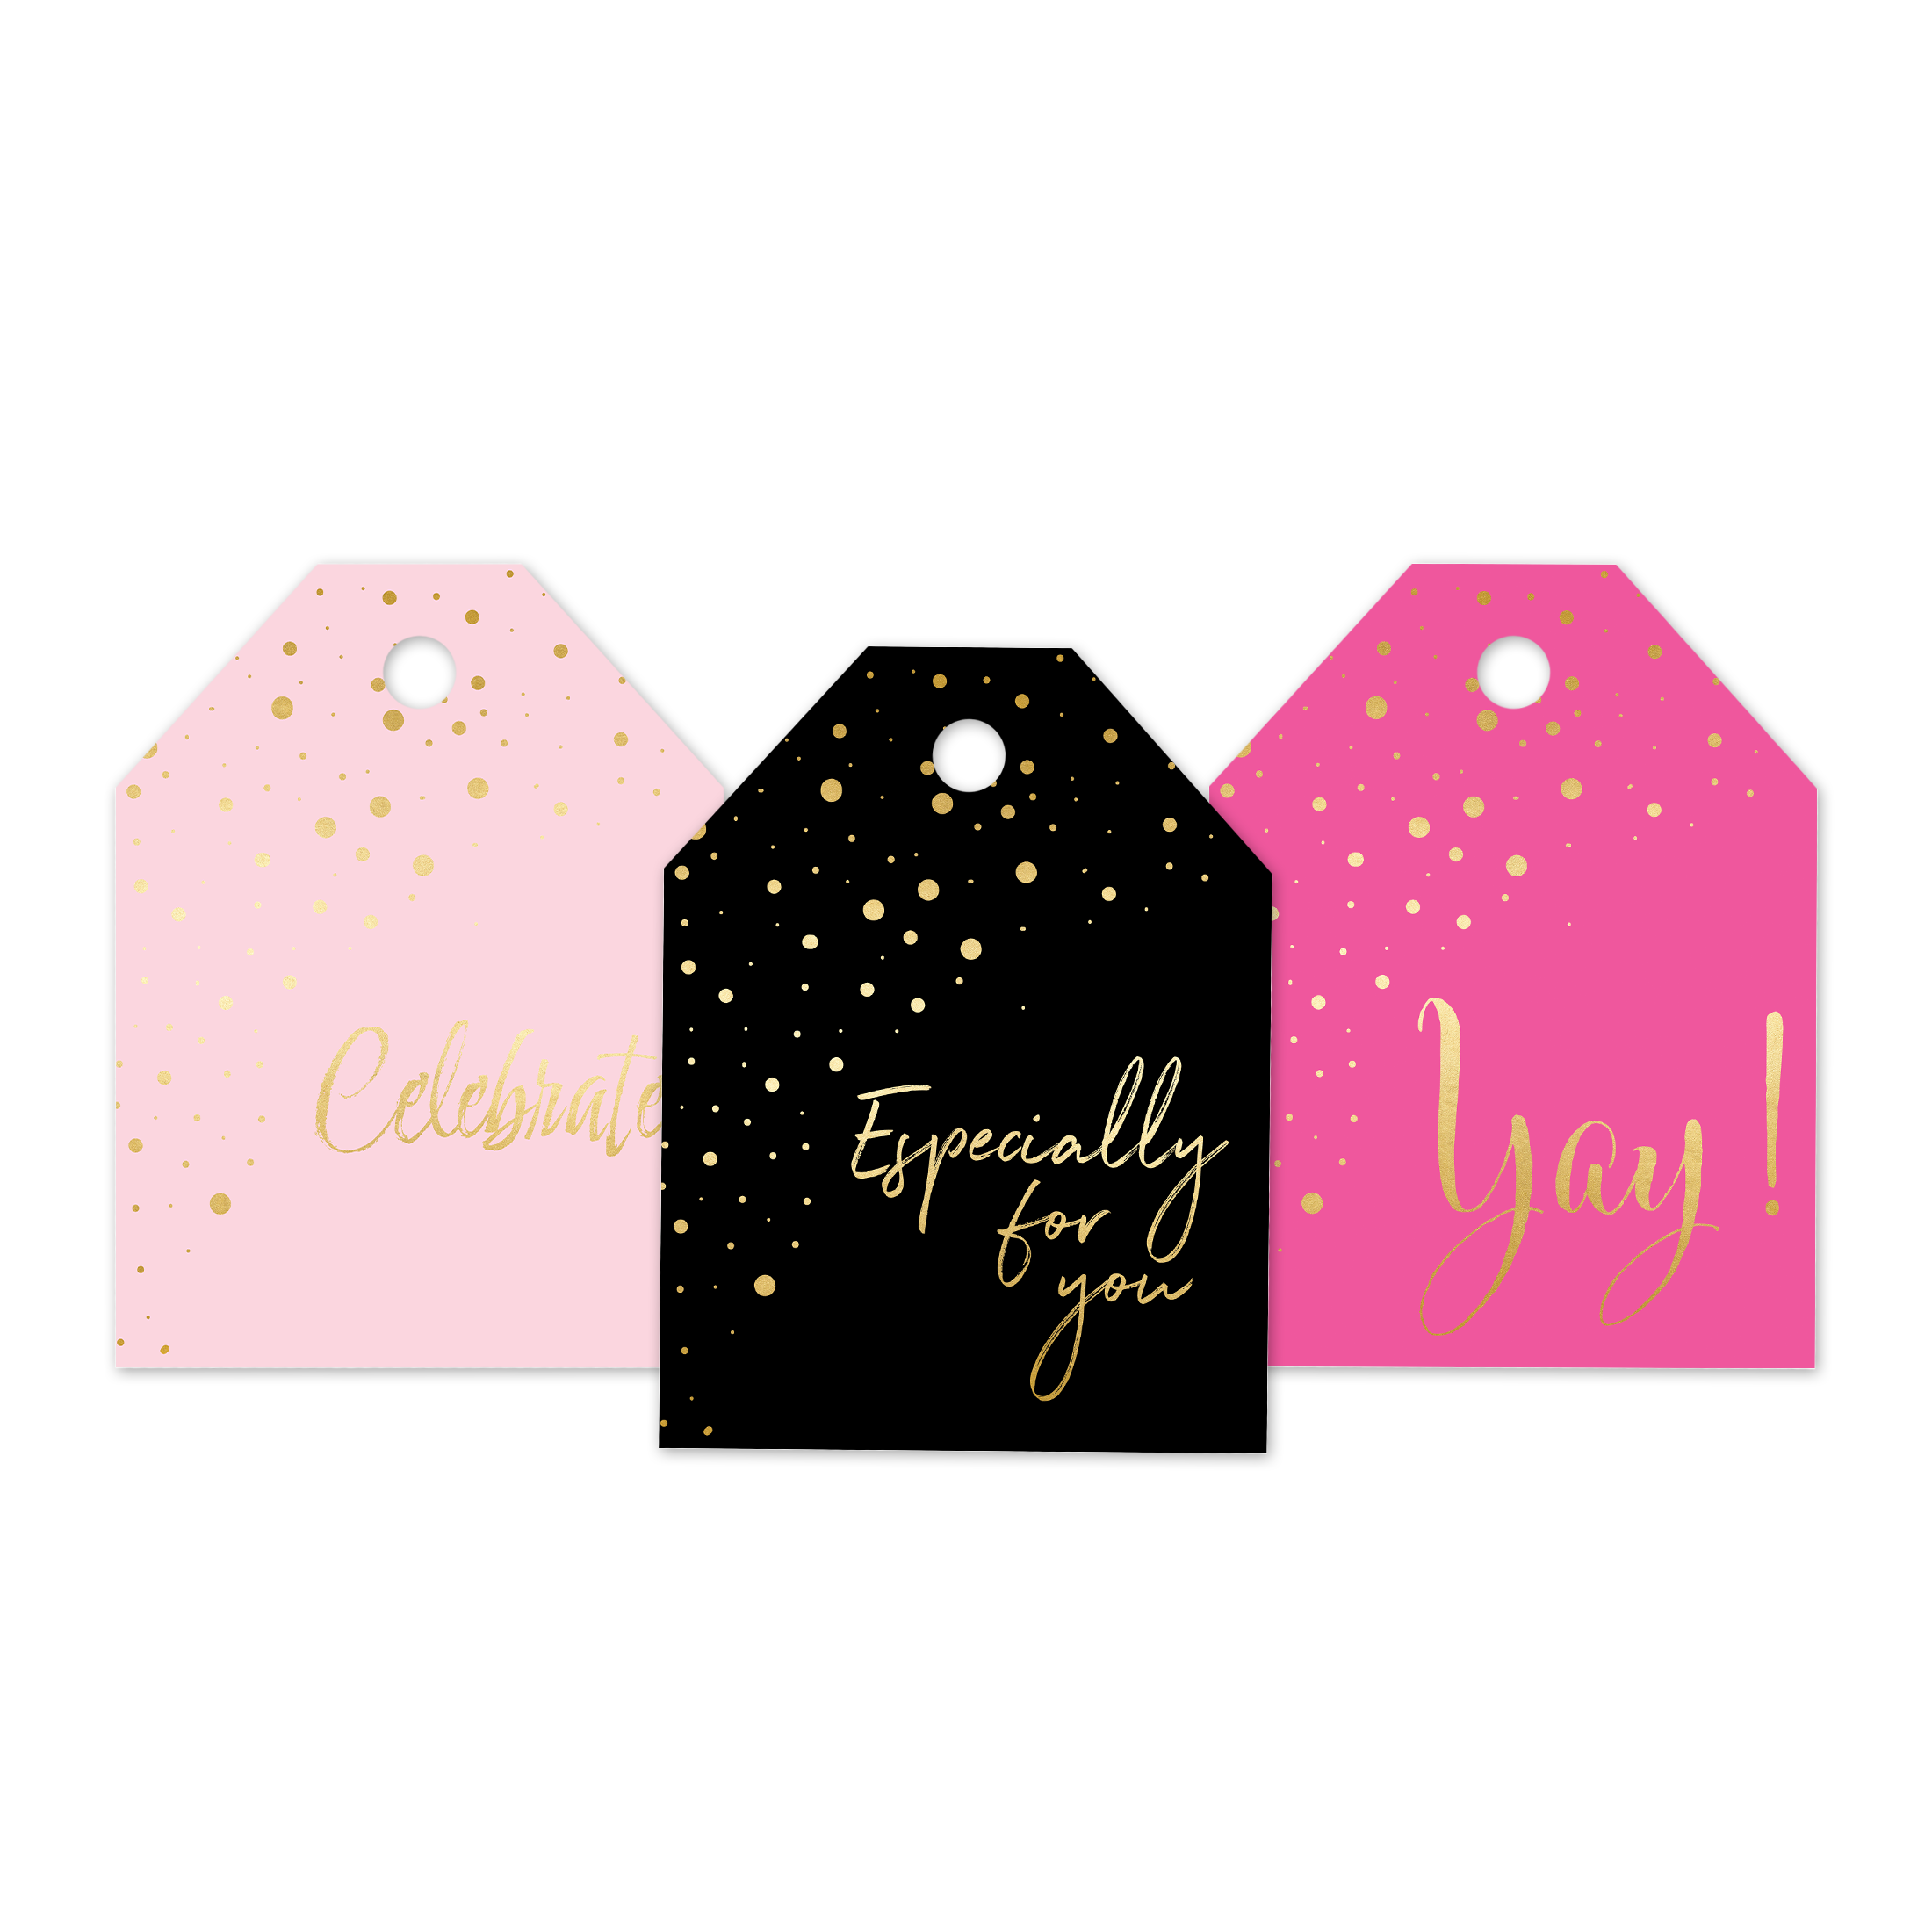 Gold Confetti Assortment Gift Tags